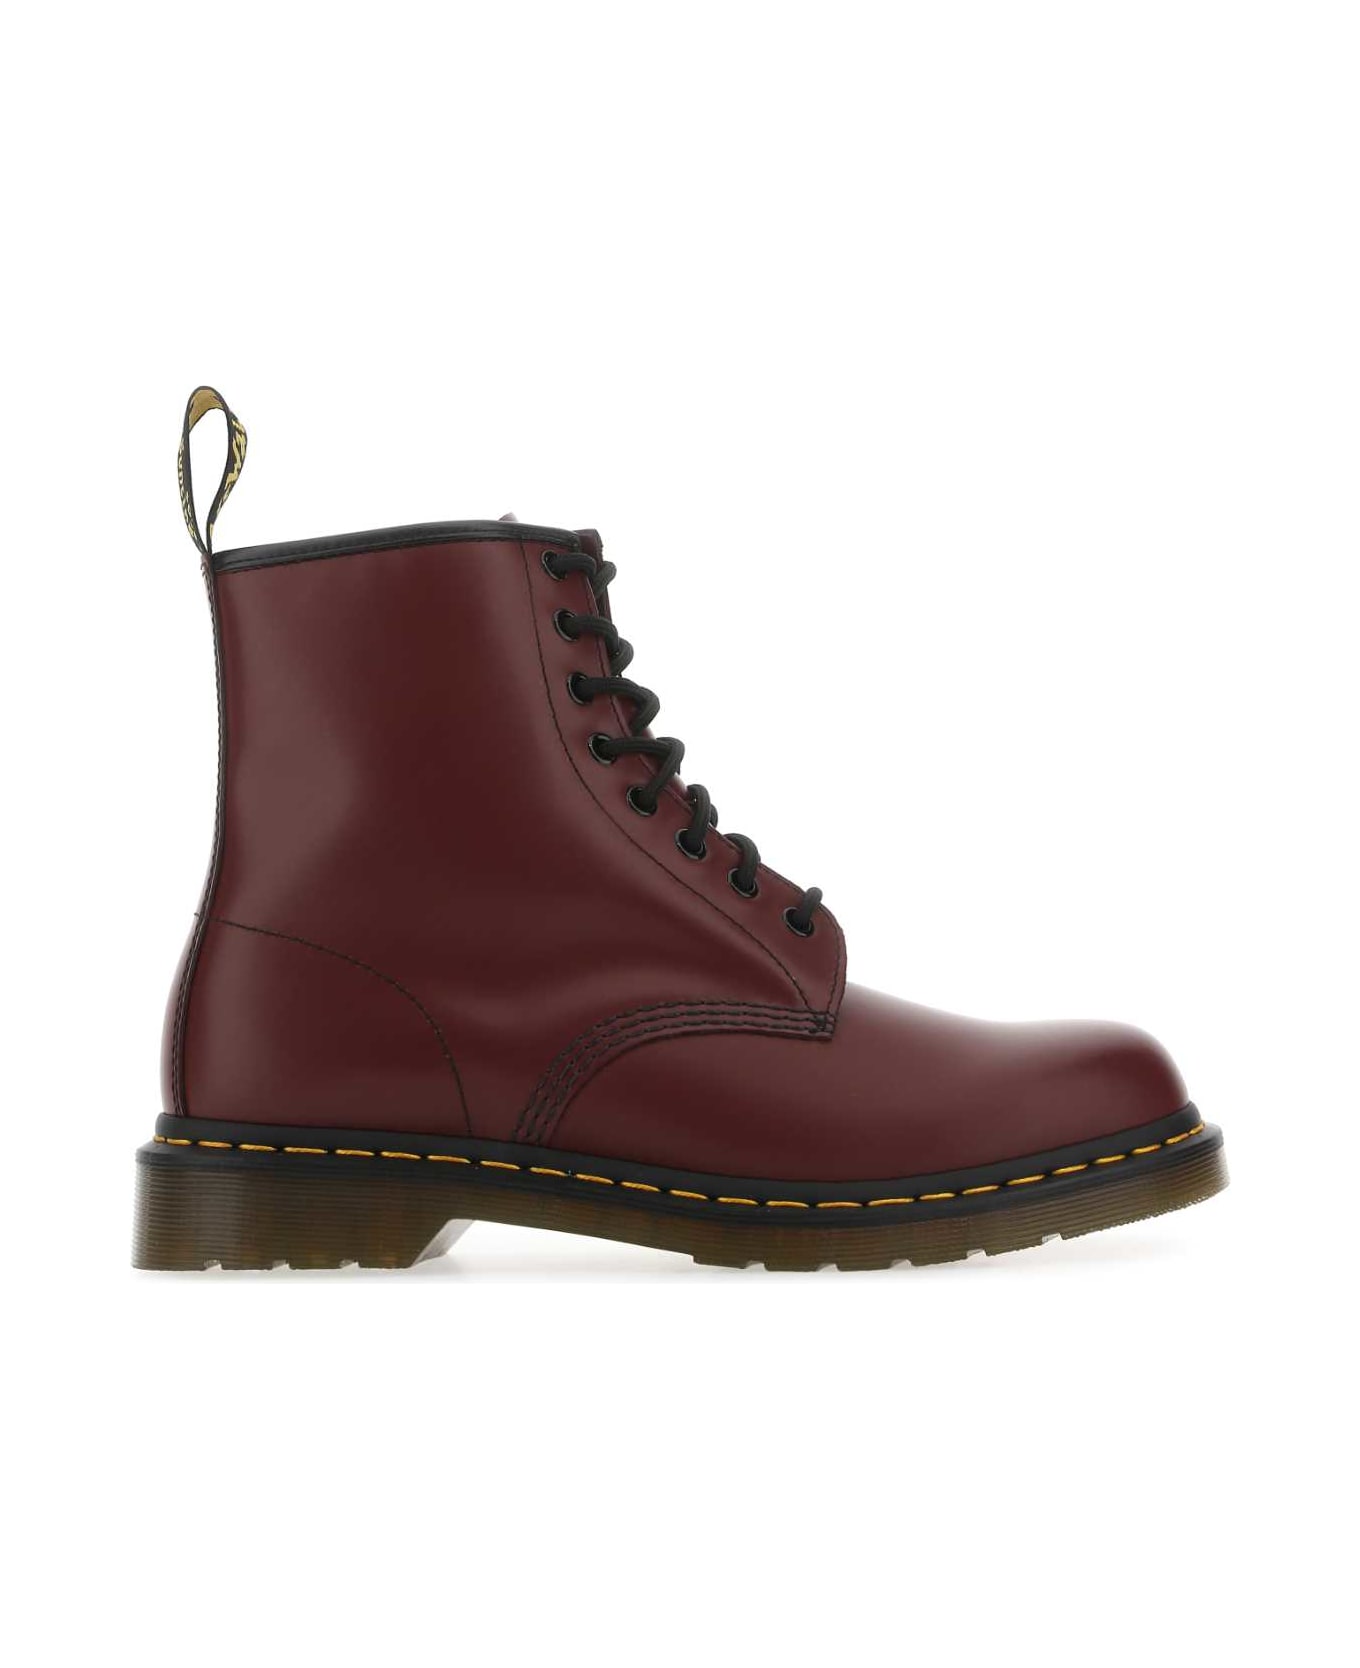 Dr. Martens Burgundy Leather 1460 Ankle Boots - CherryRedSmooth